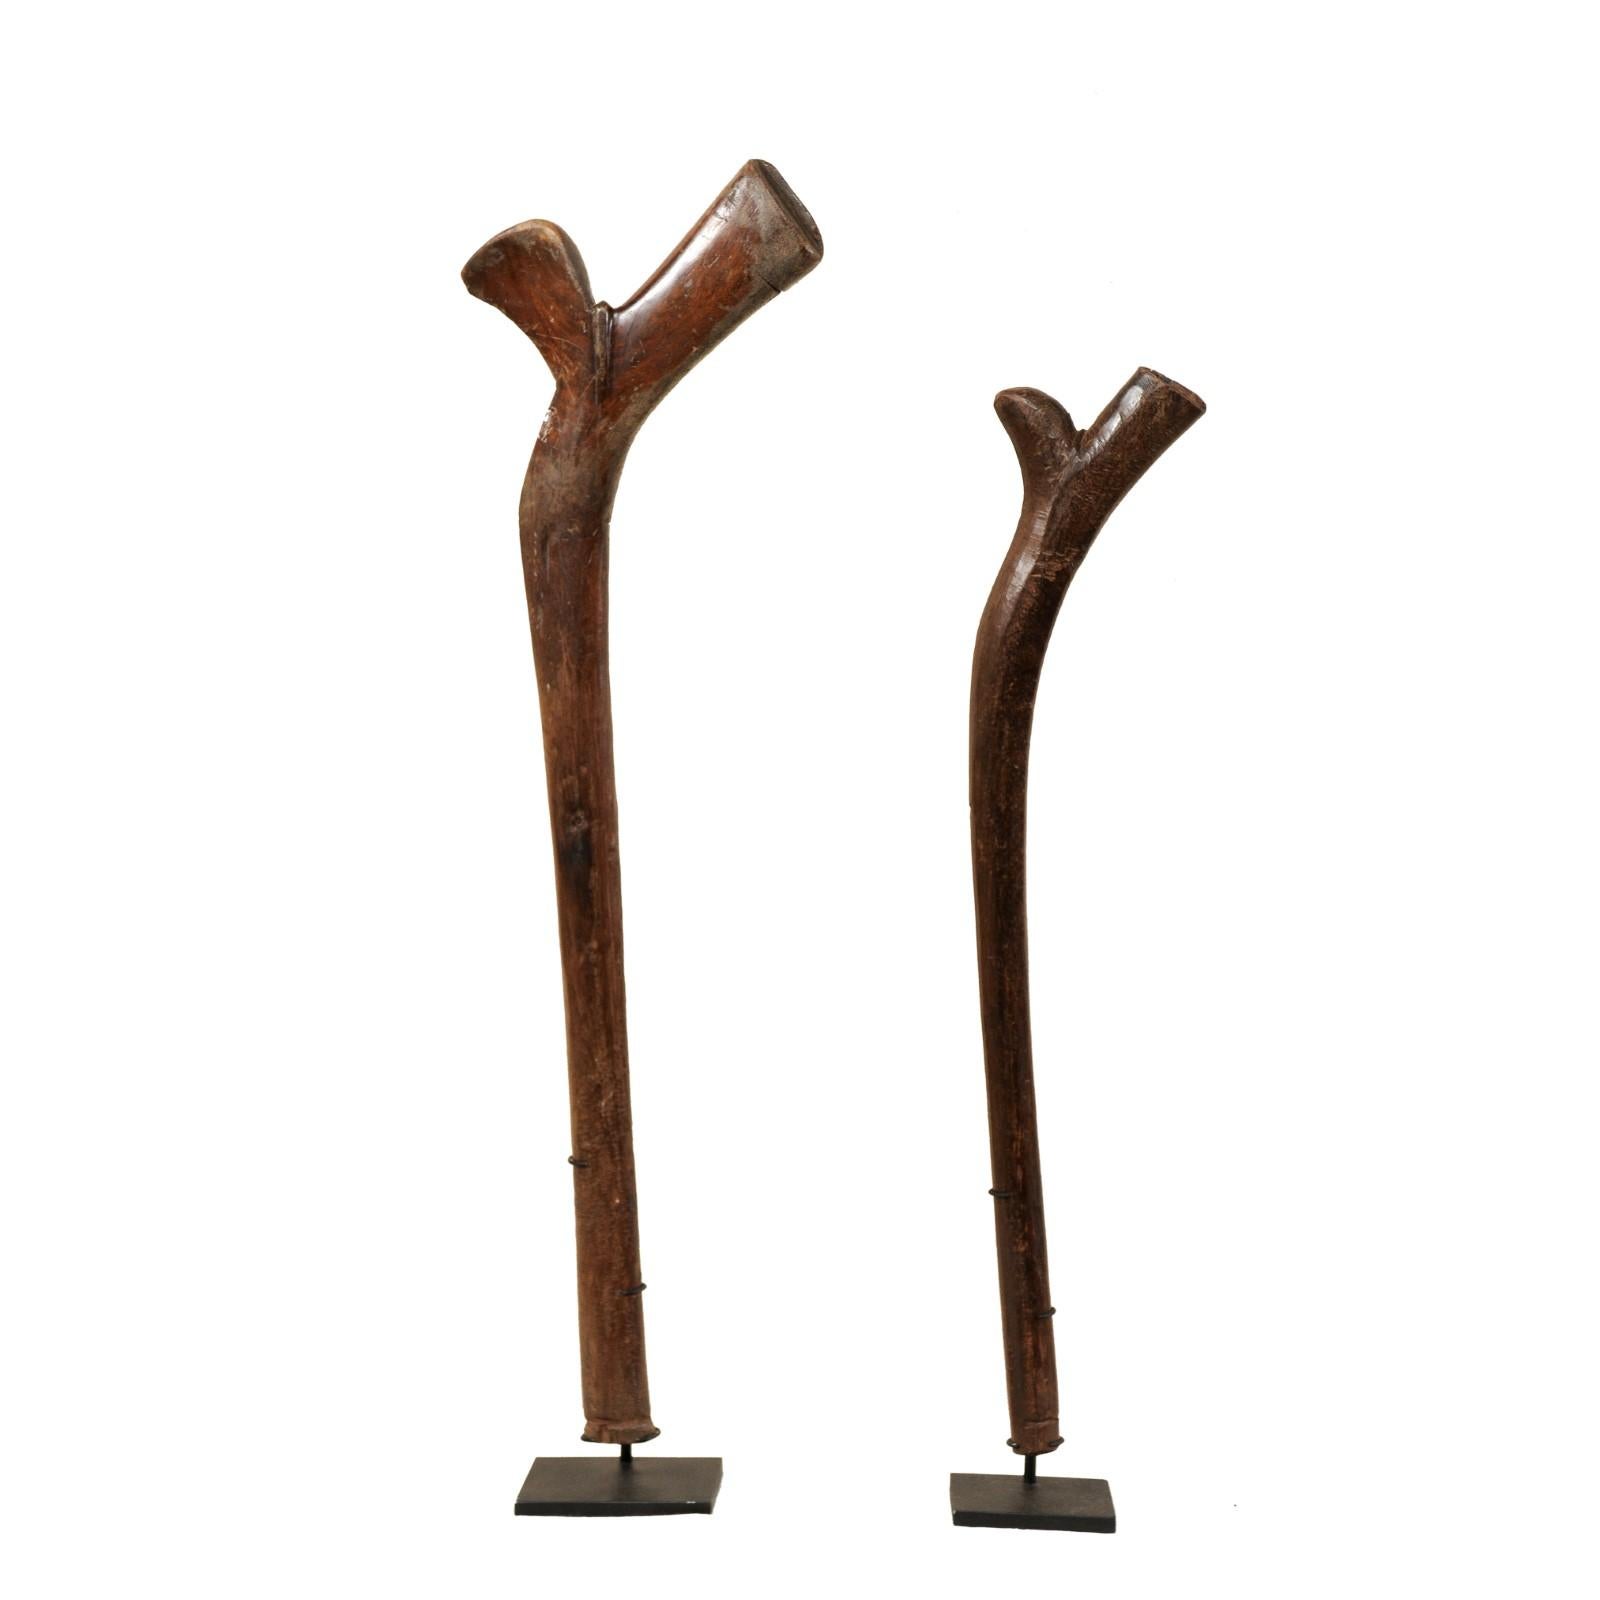 Pair of Kiakavo Wooden Clubs from the Fiji Islands on Custom Black Stands